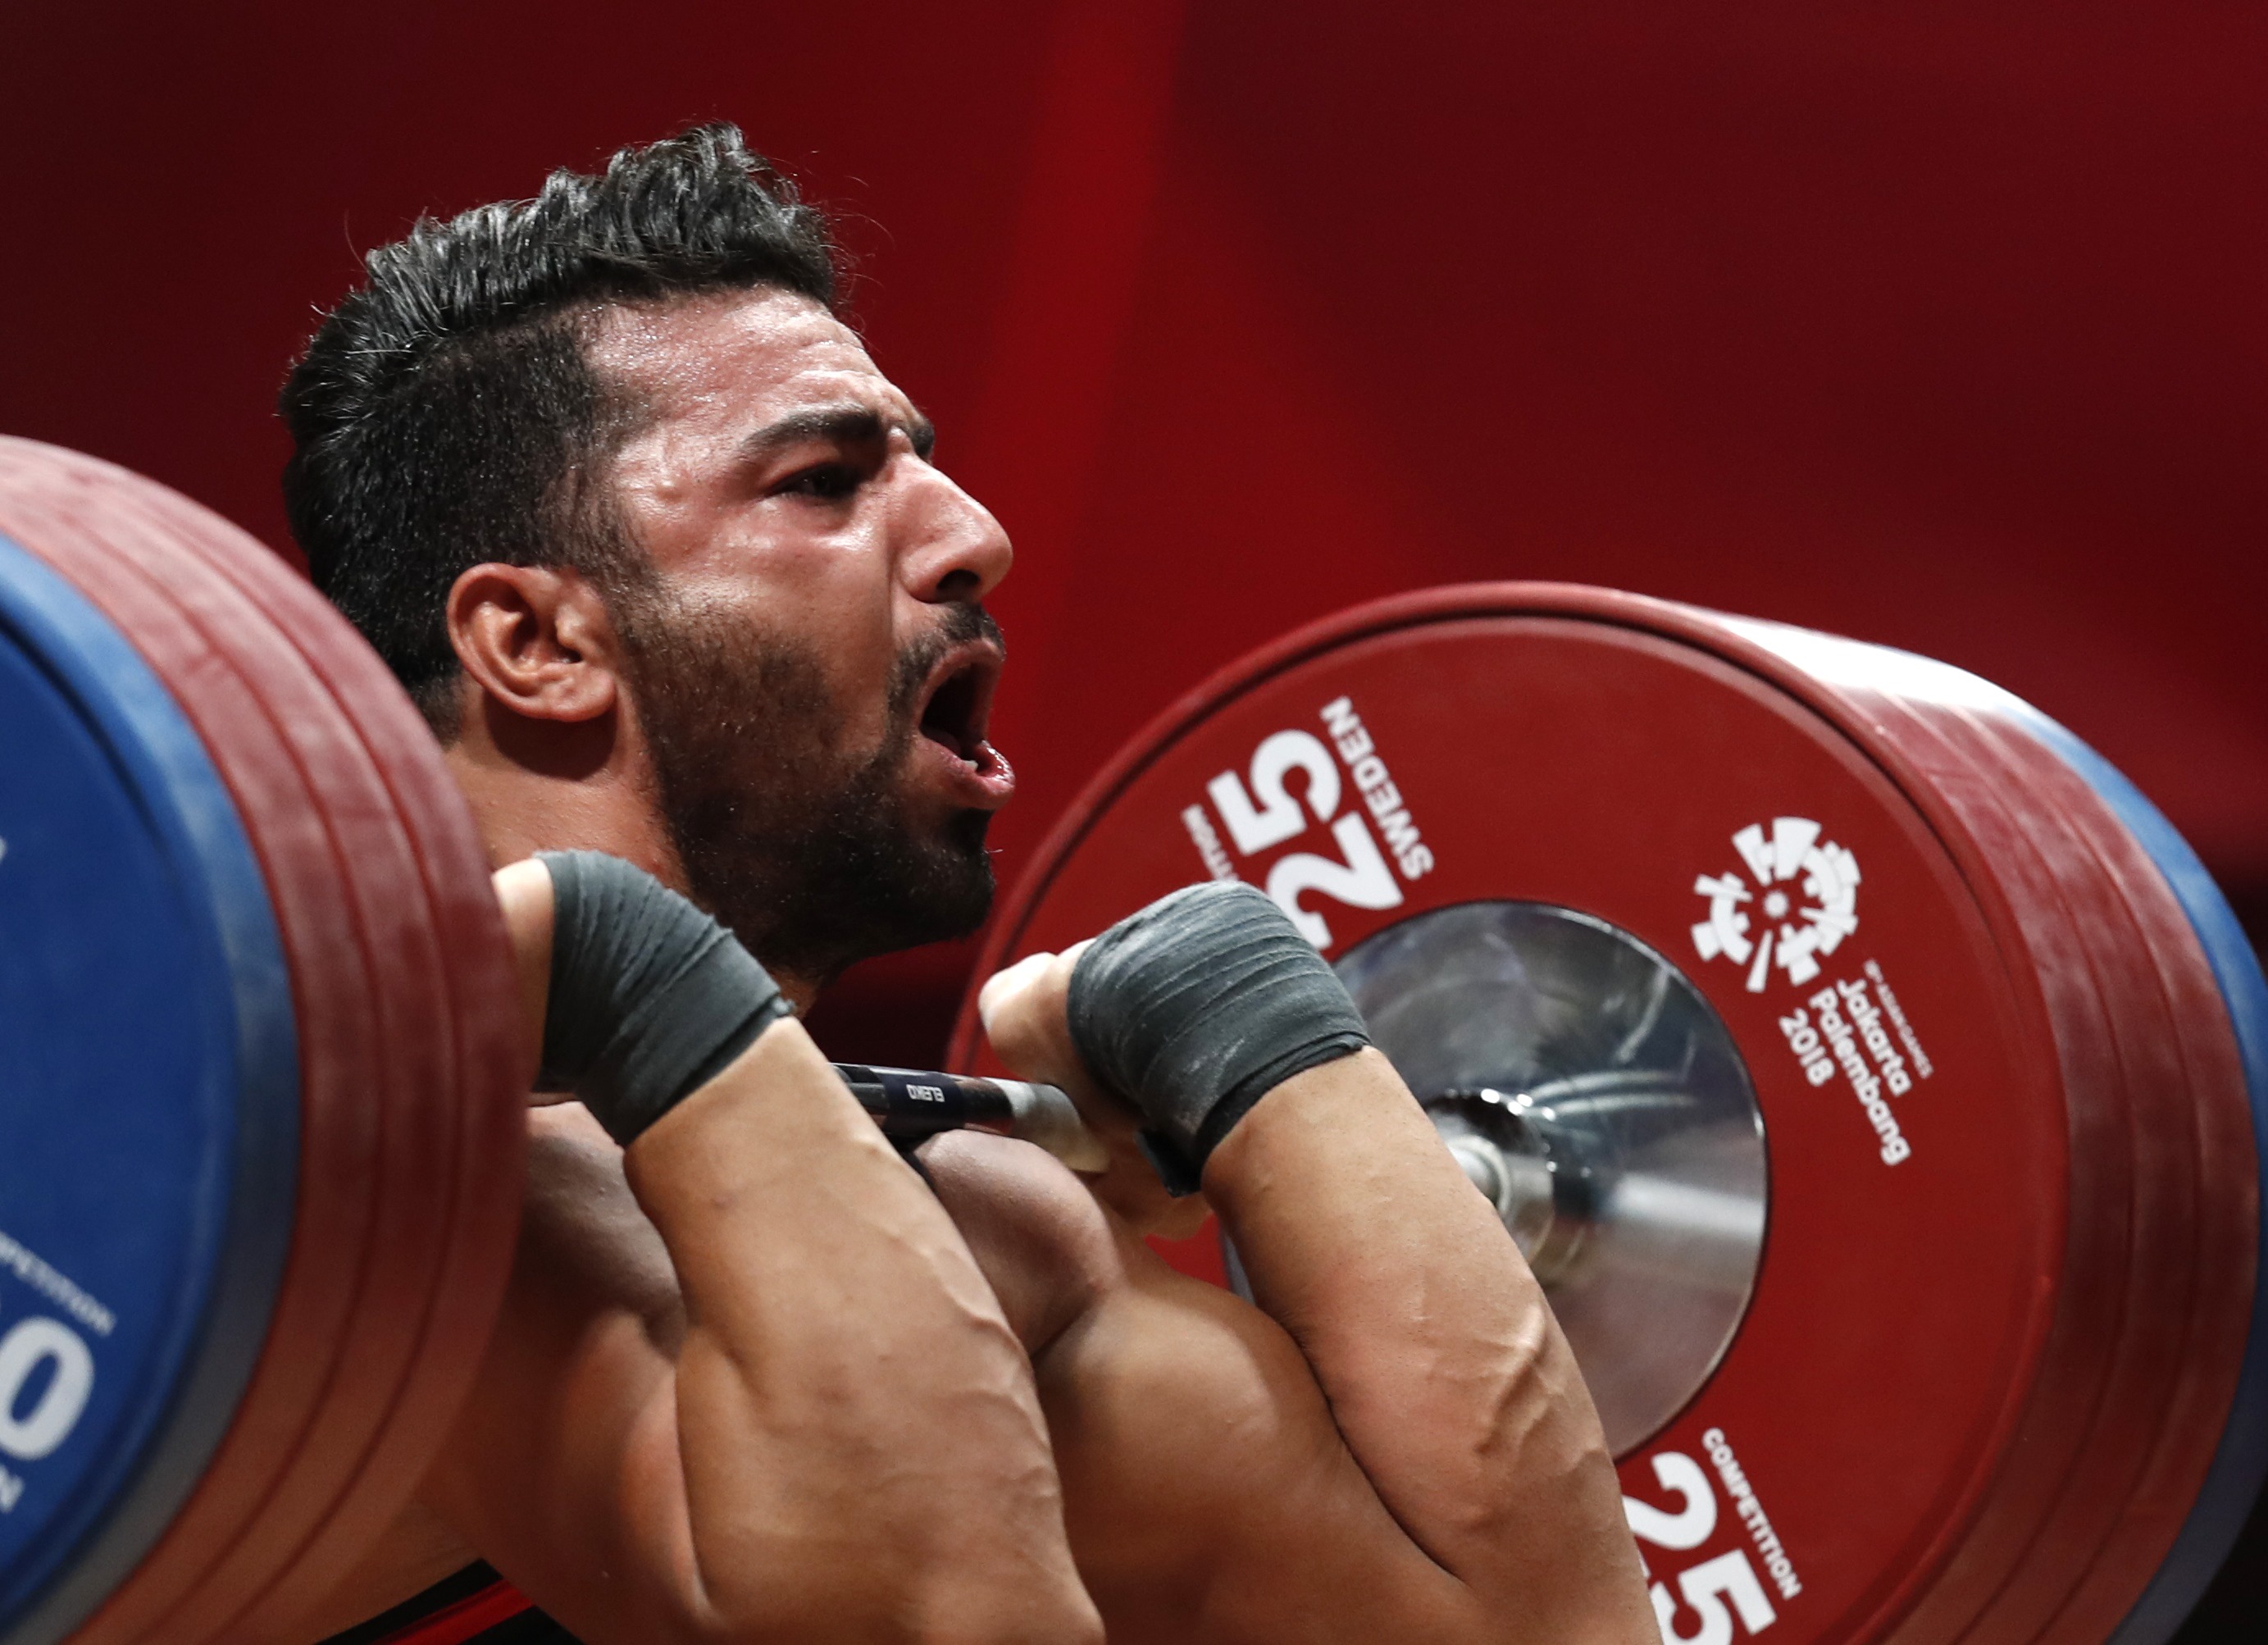 Weightlifting: Governing body hopes Asian Games helps secure weightlifting's future